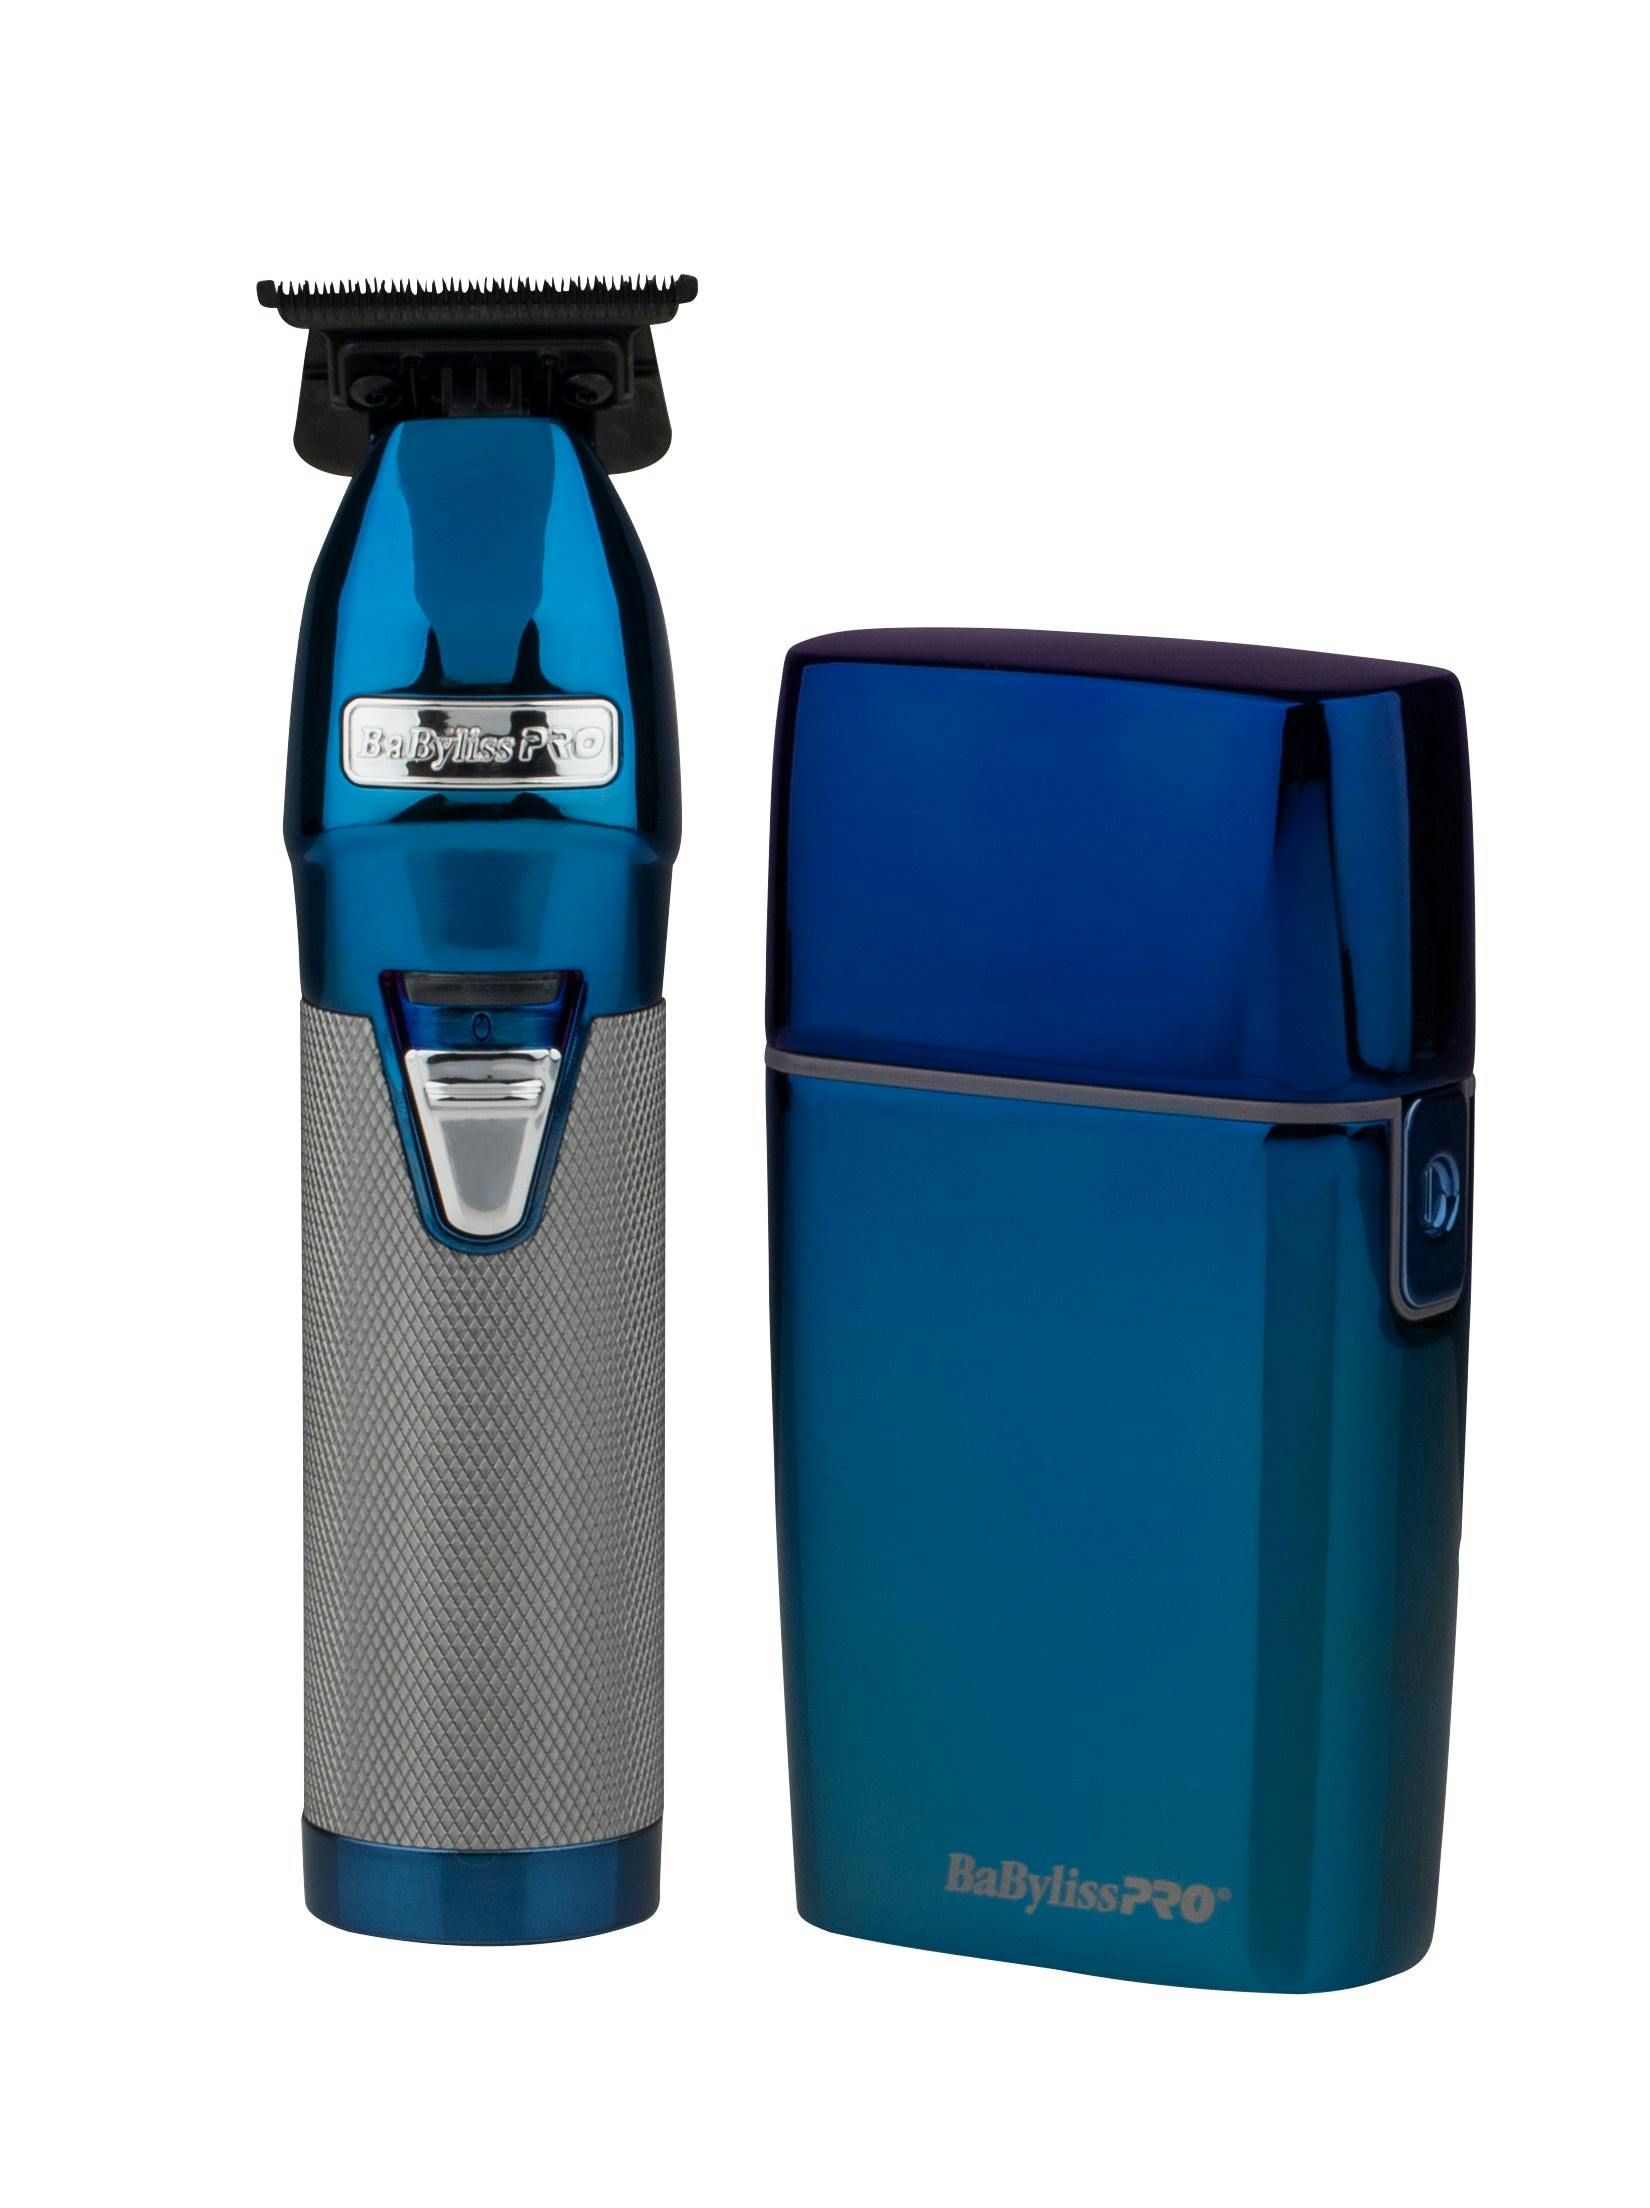 BaBylissPRO Duo Blue Chrome Double Foil Shaver and Outliner Trimmer